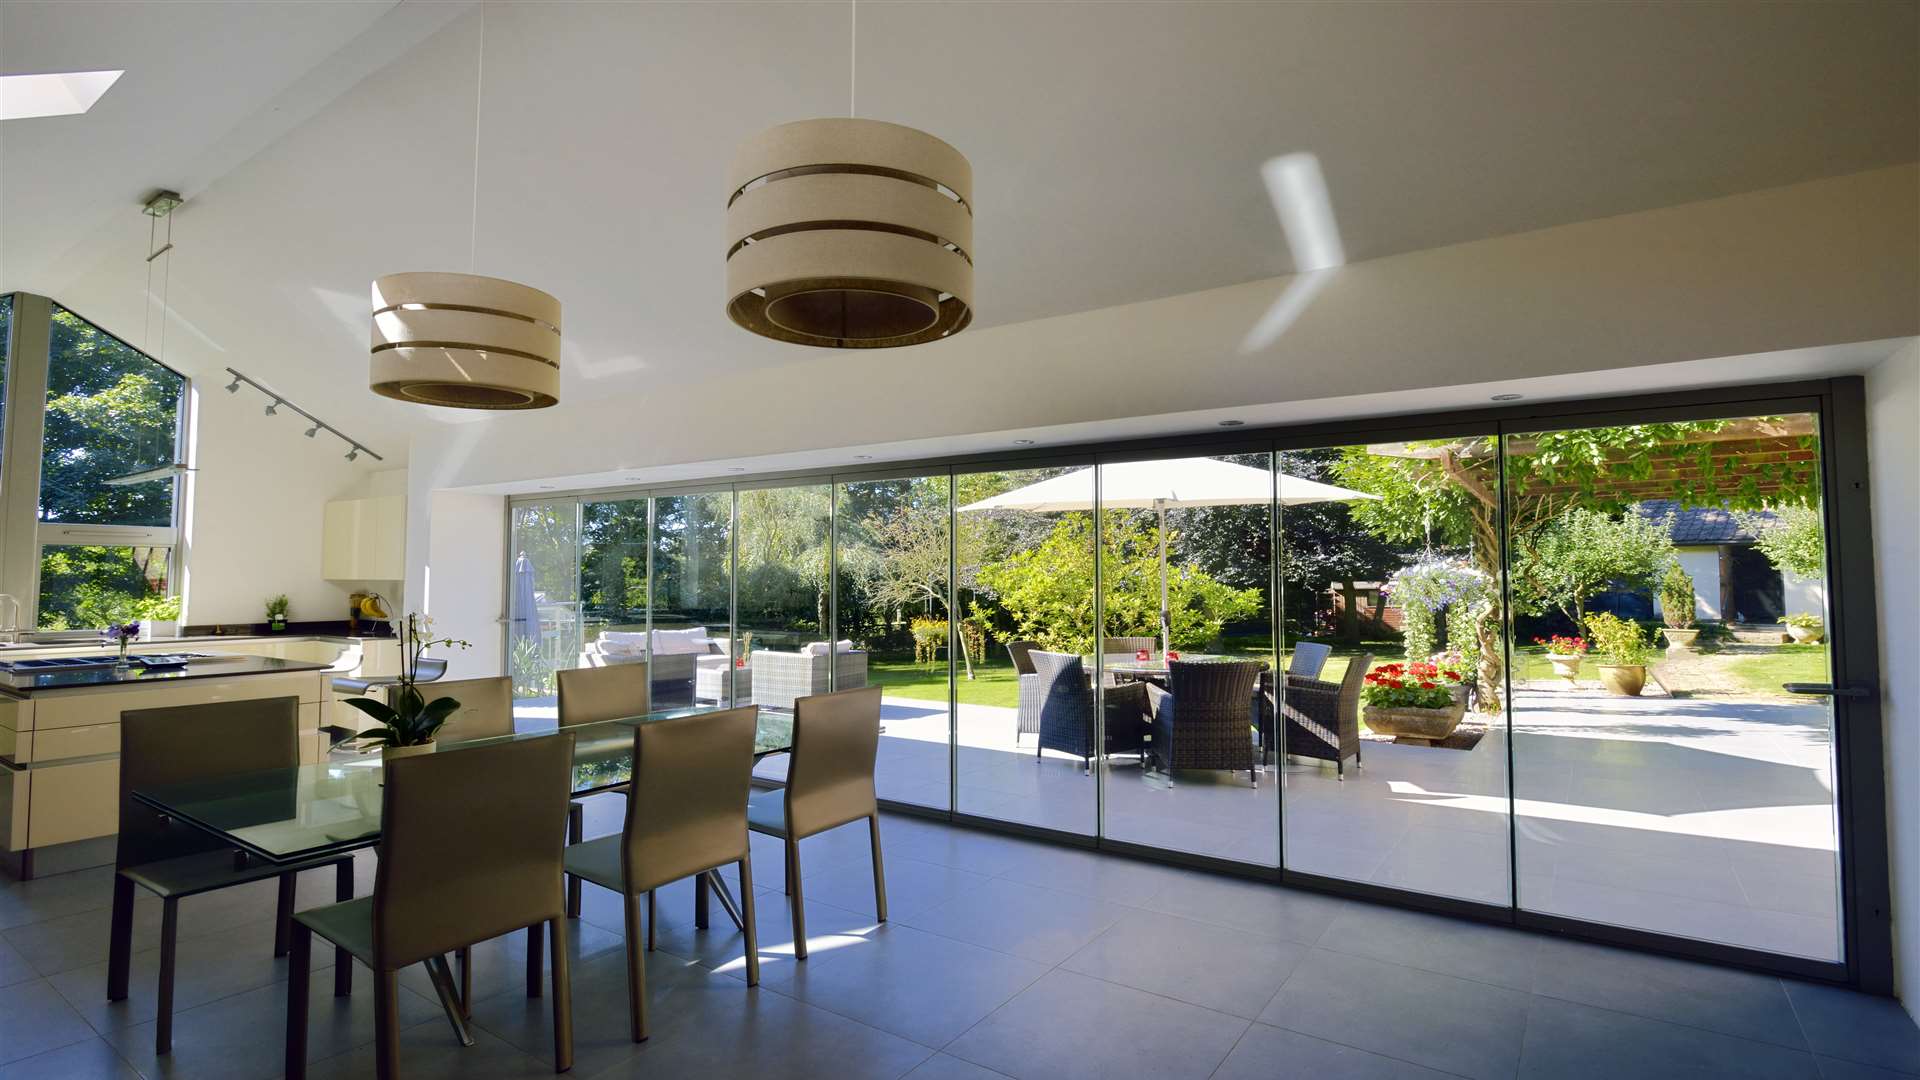 Frameless Glass Curtains' products do not have mullions, meaning they look like open windows